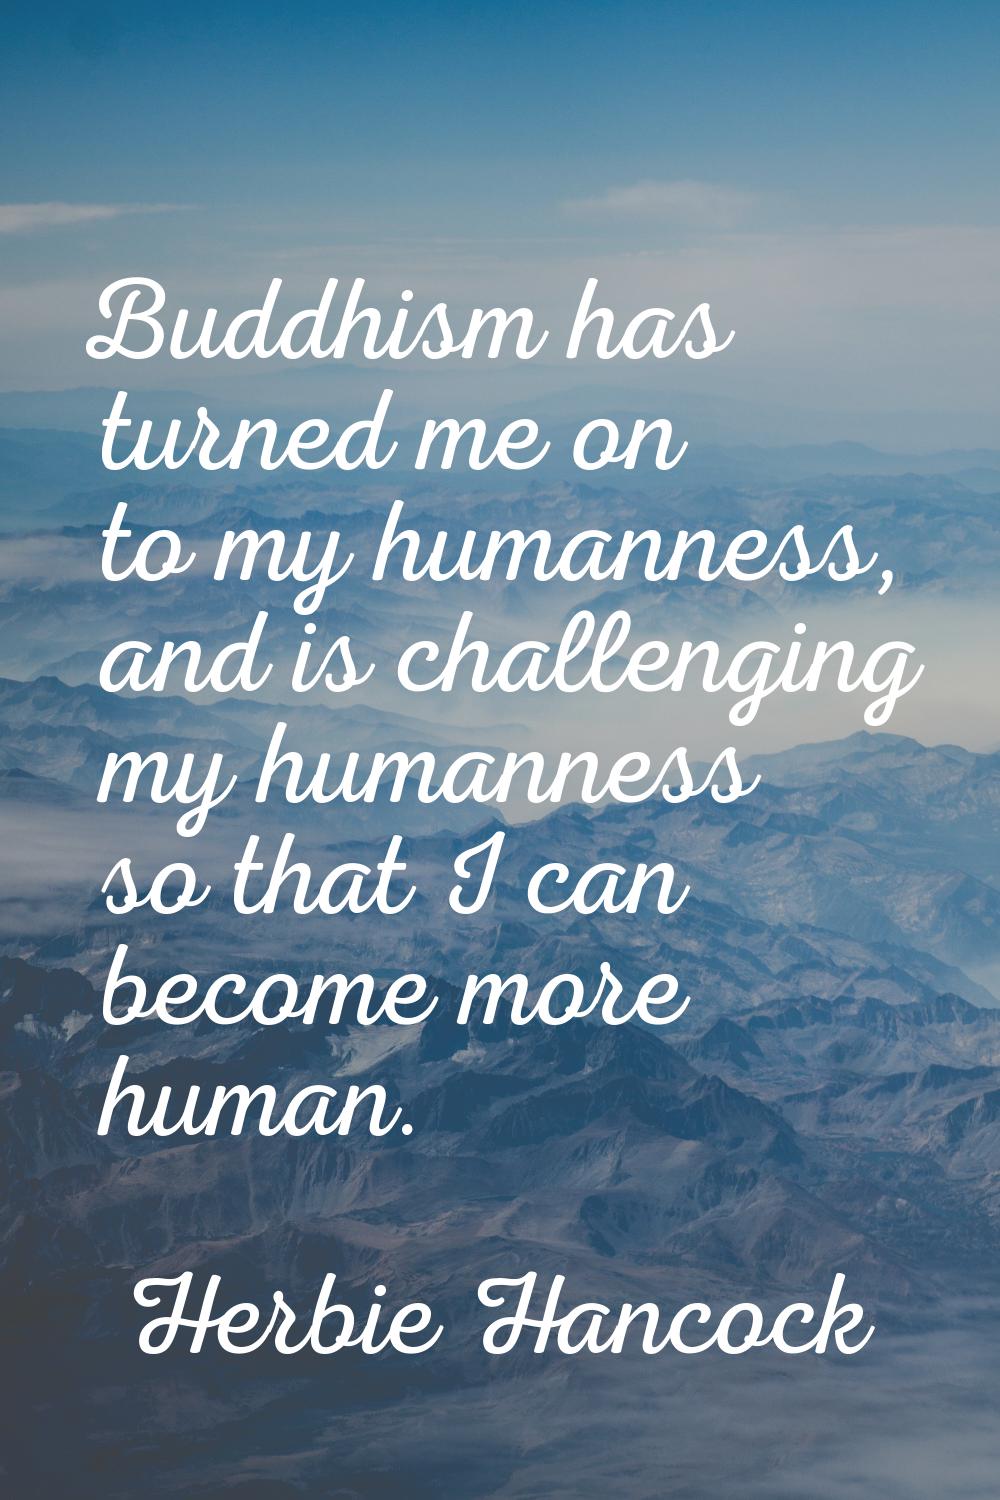 Buddhism has turned me on to my humanness, and is challenging my humanness so that I can become mor